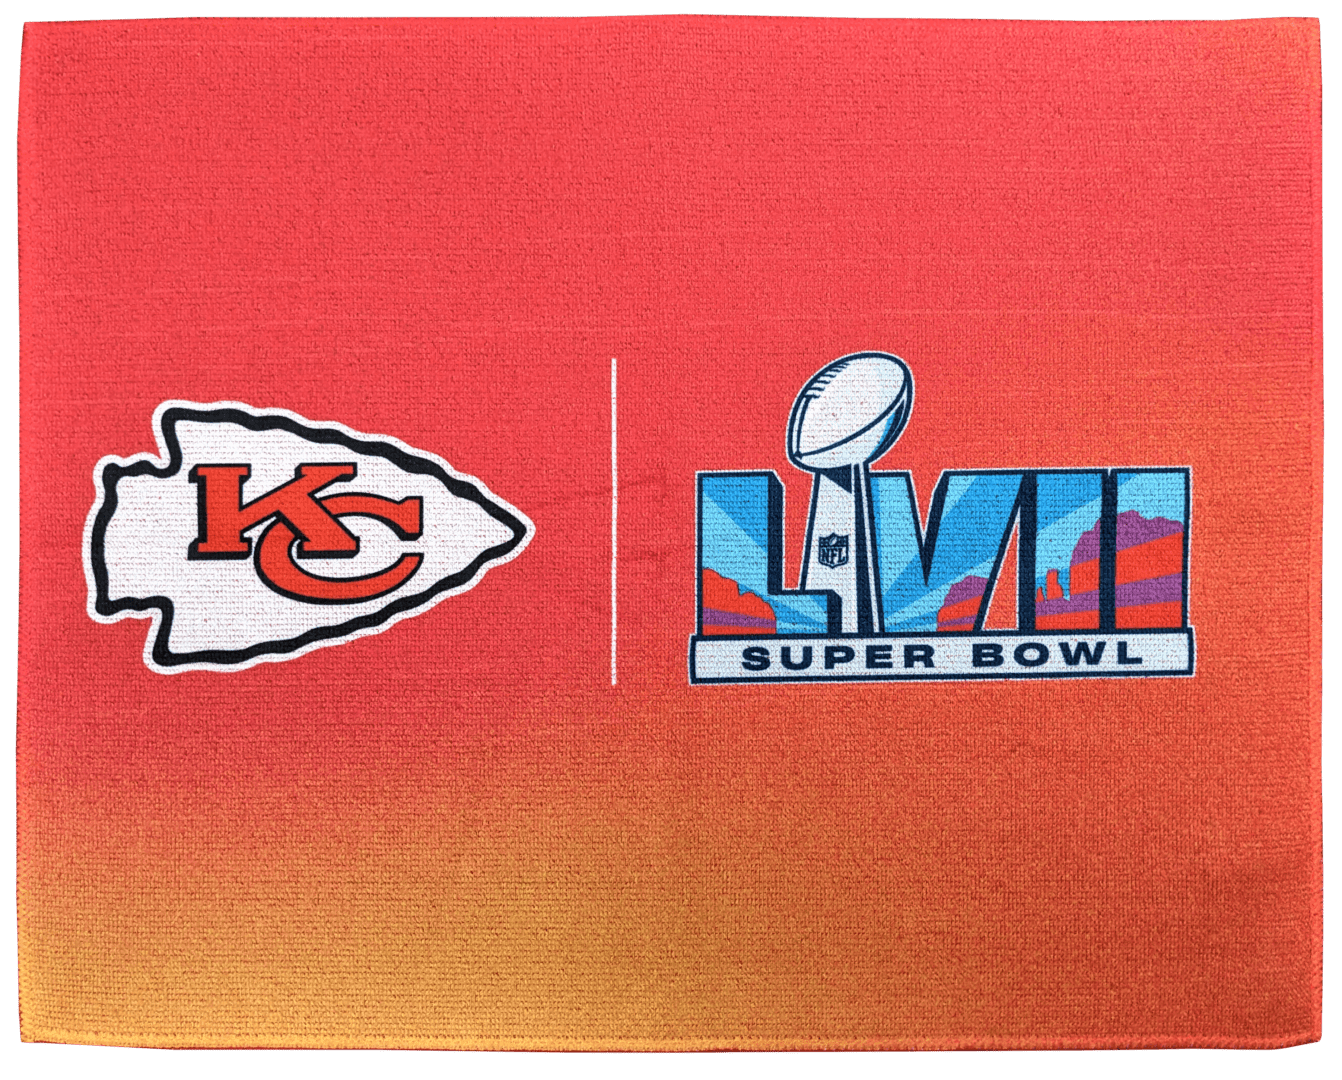 Super bowl text printed on a cloth